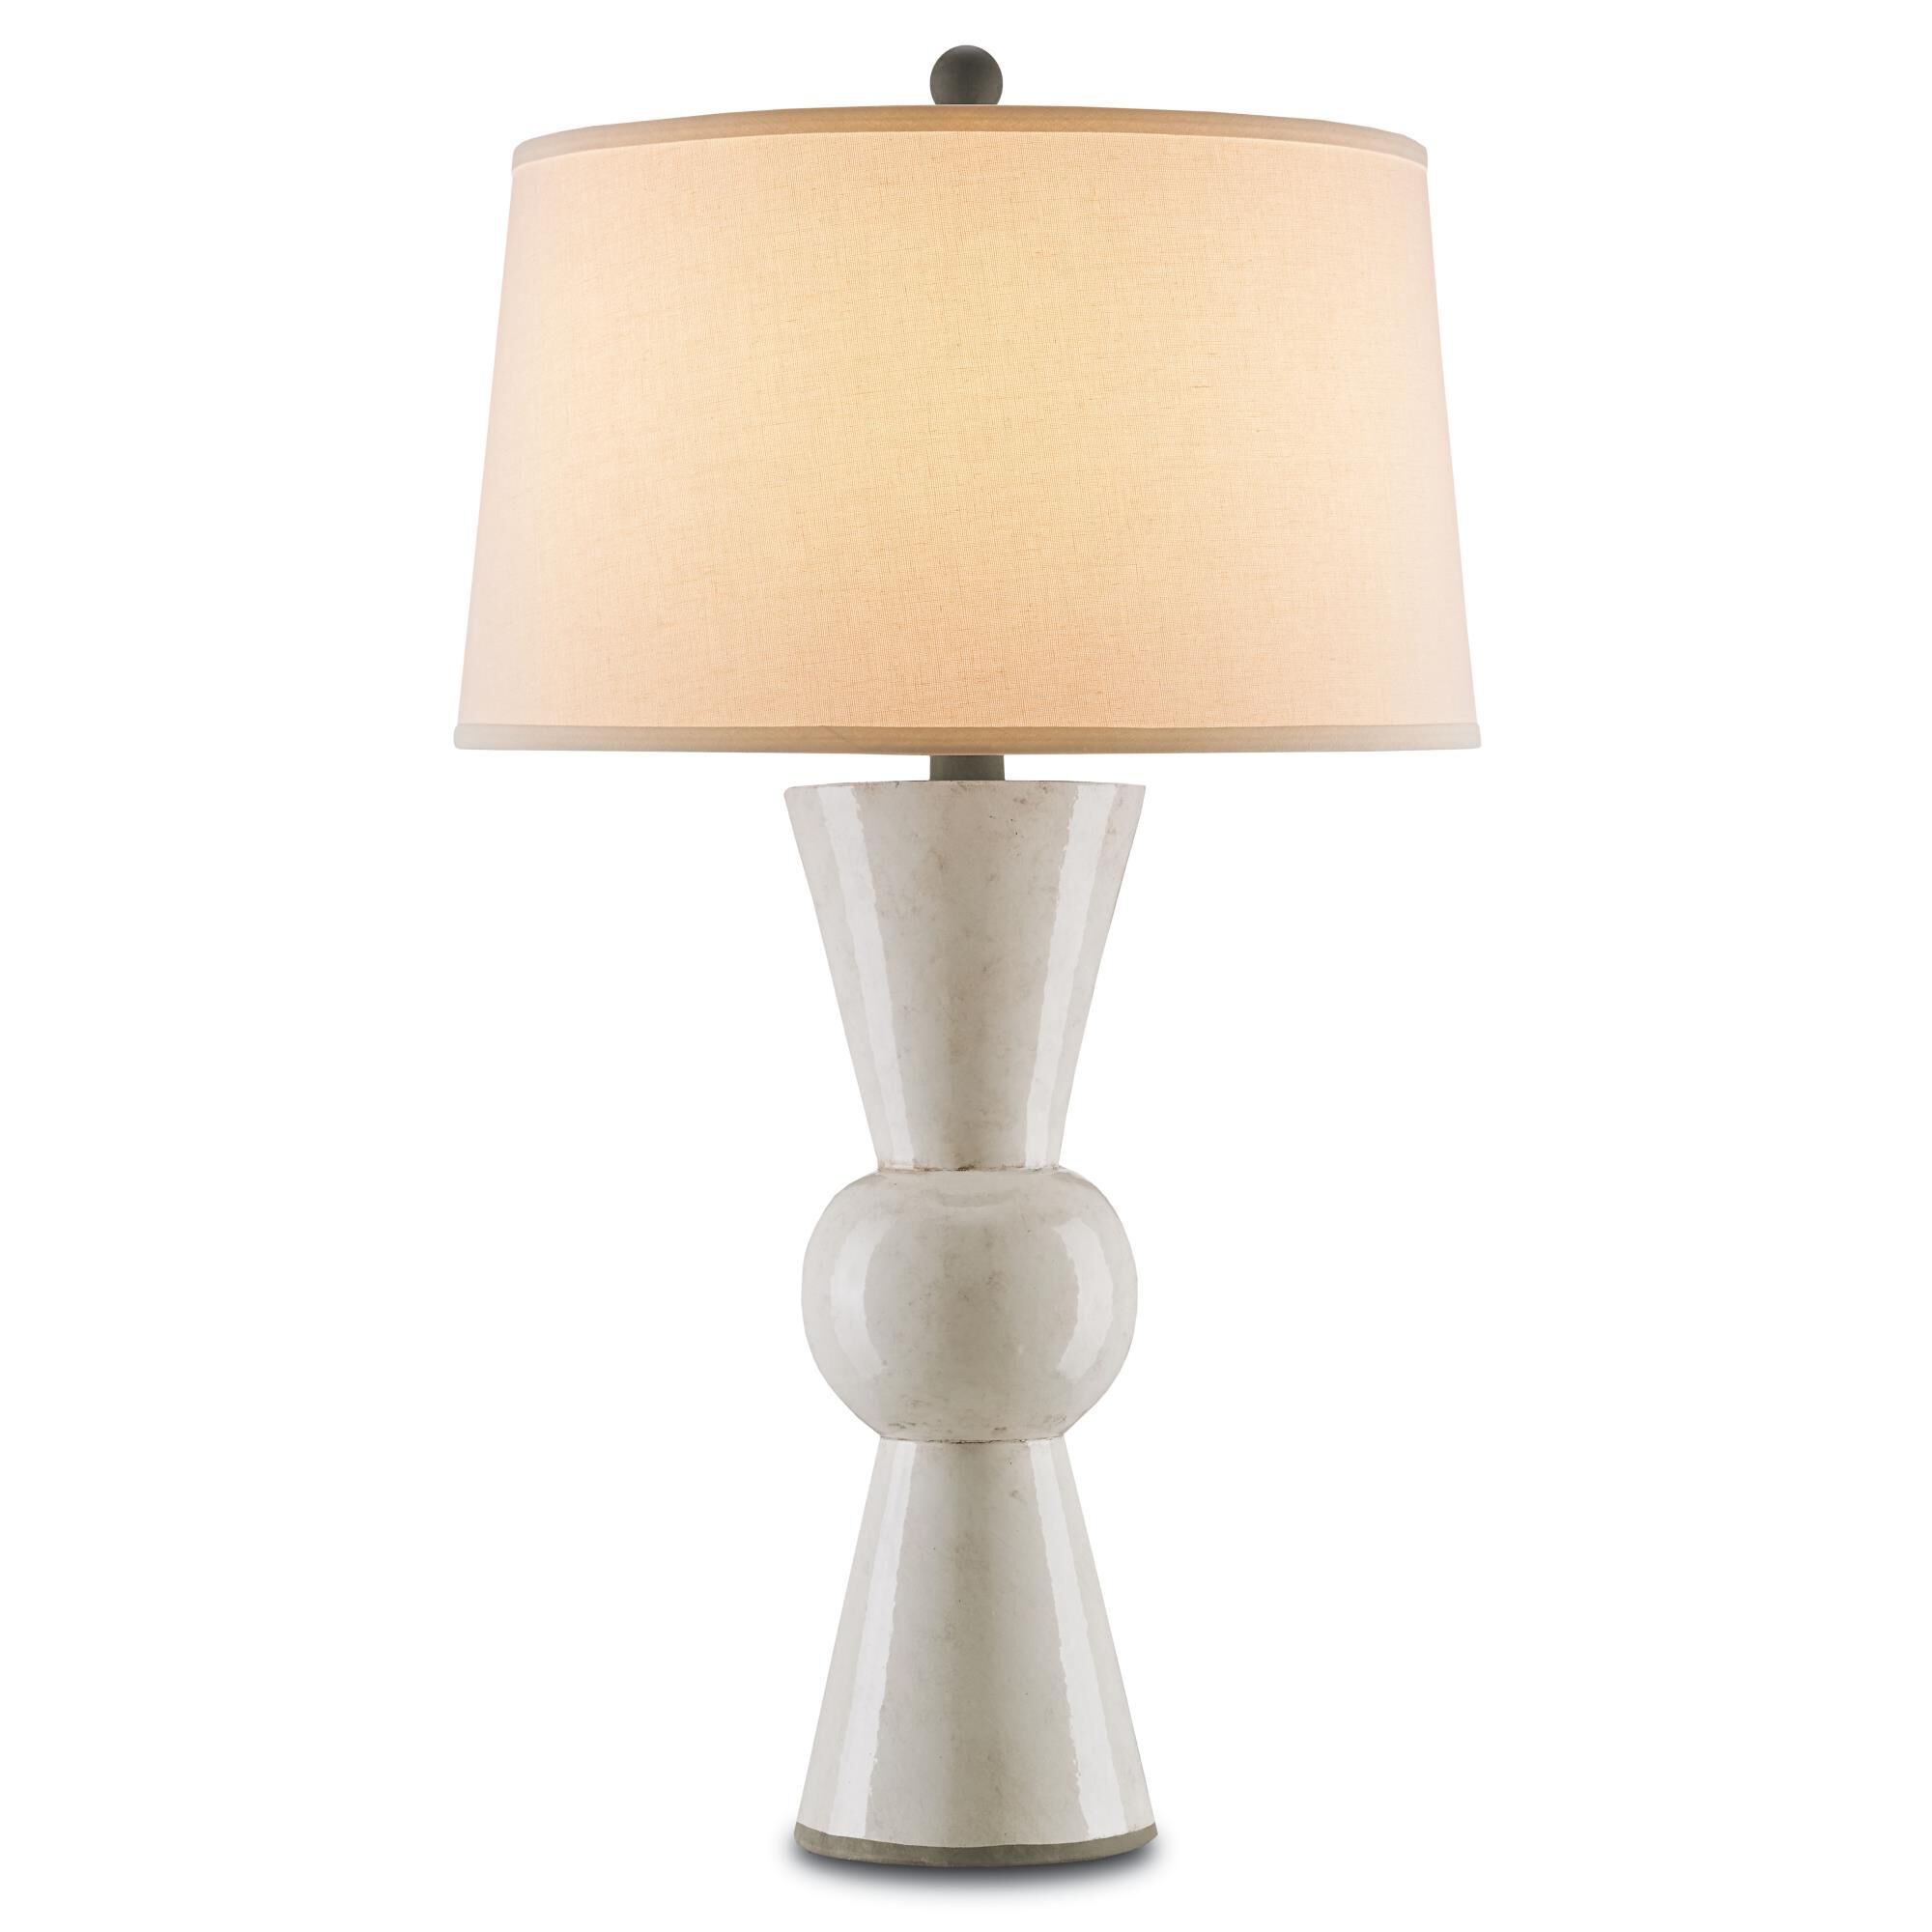 Upbeat 31 Inch Table Lamp by Currey and Company | Capitol Lighting 1800lighting.com